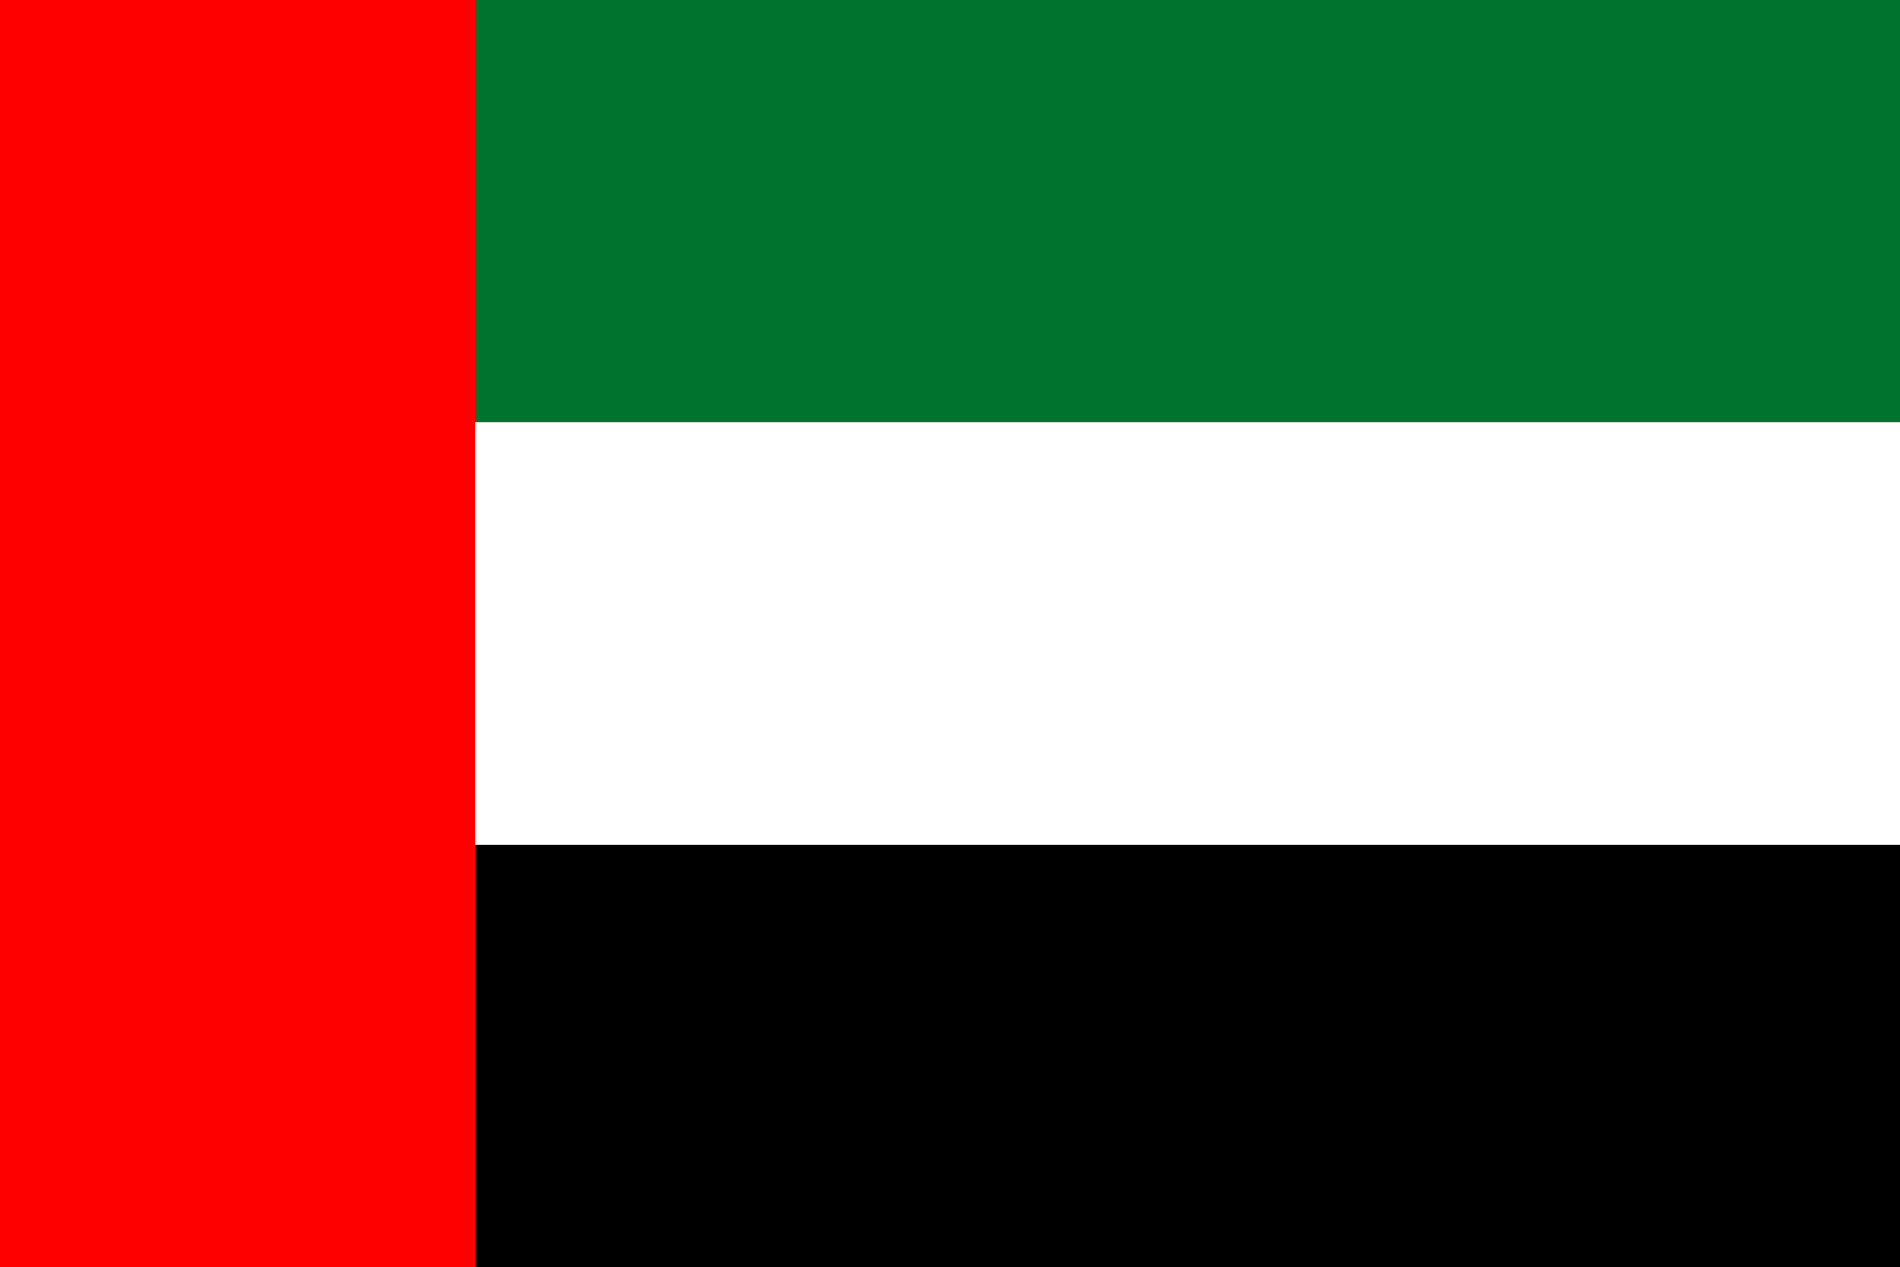 The flag of the United Arab Emirates. Red, green white and black lines